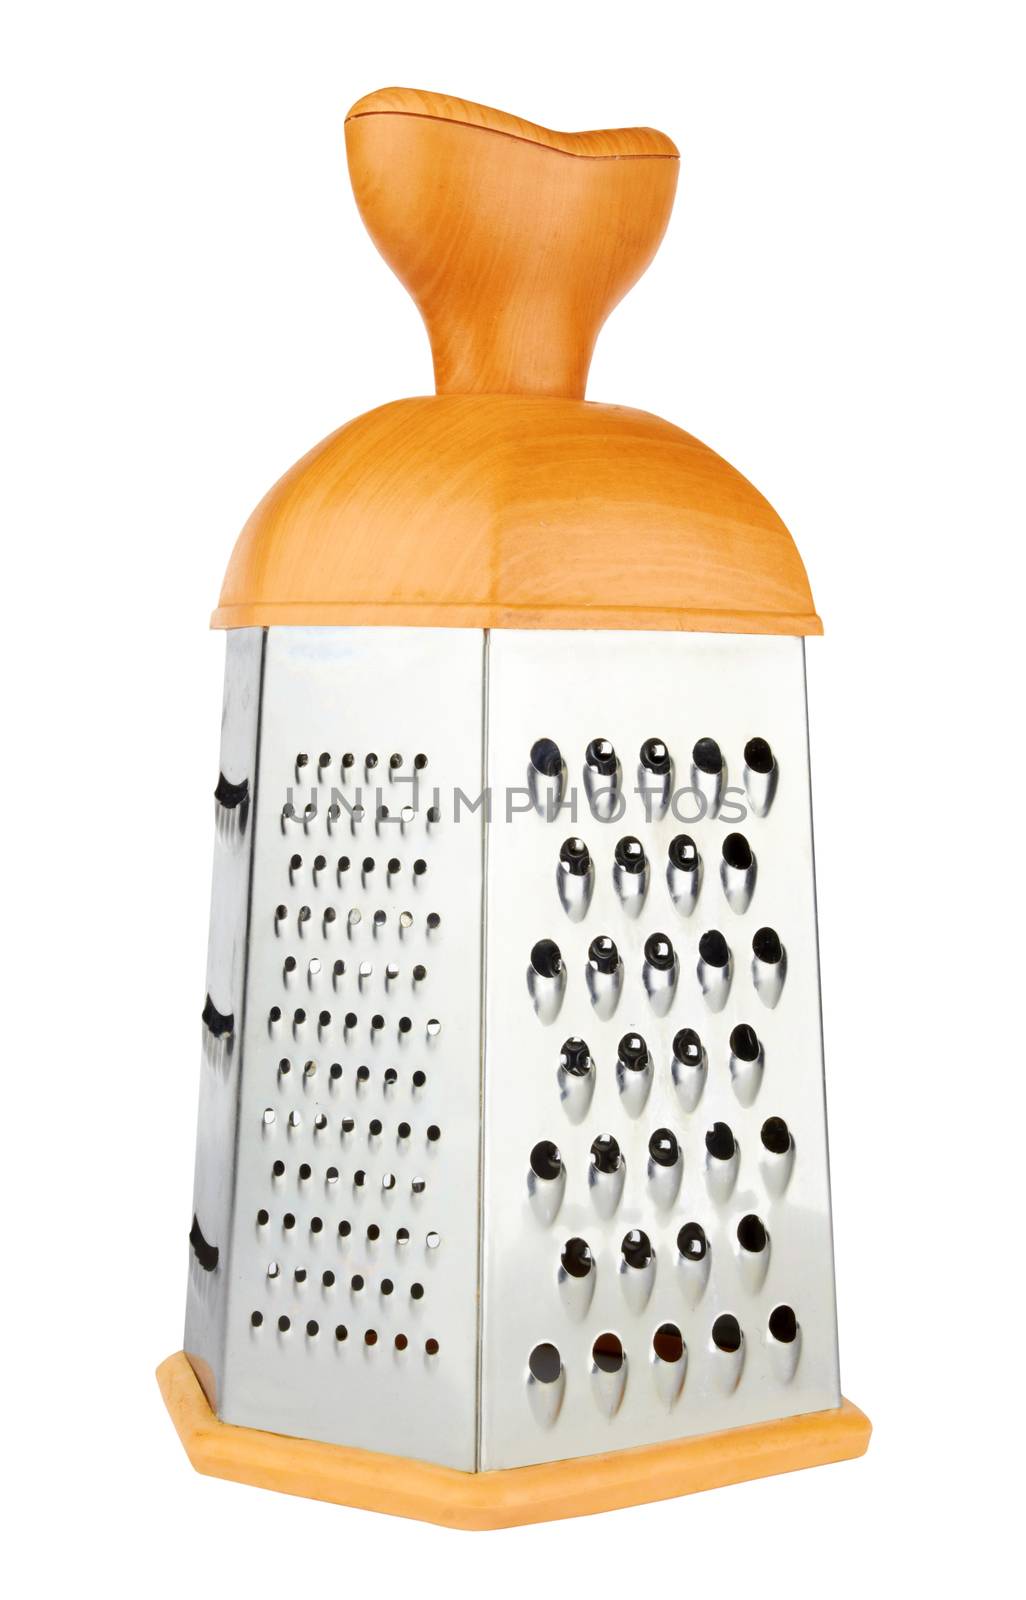 Stainless steel vegetable grater isolated on the white background 